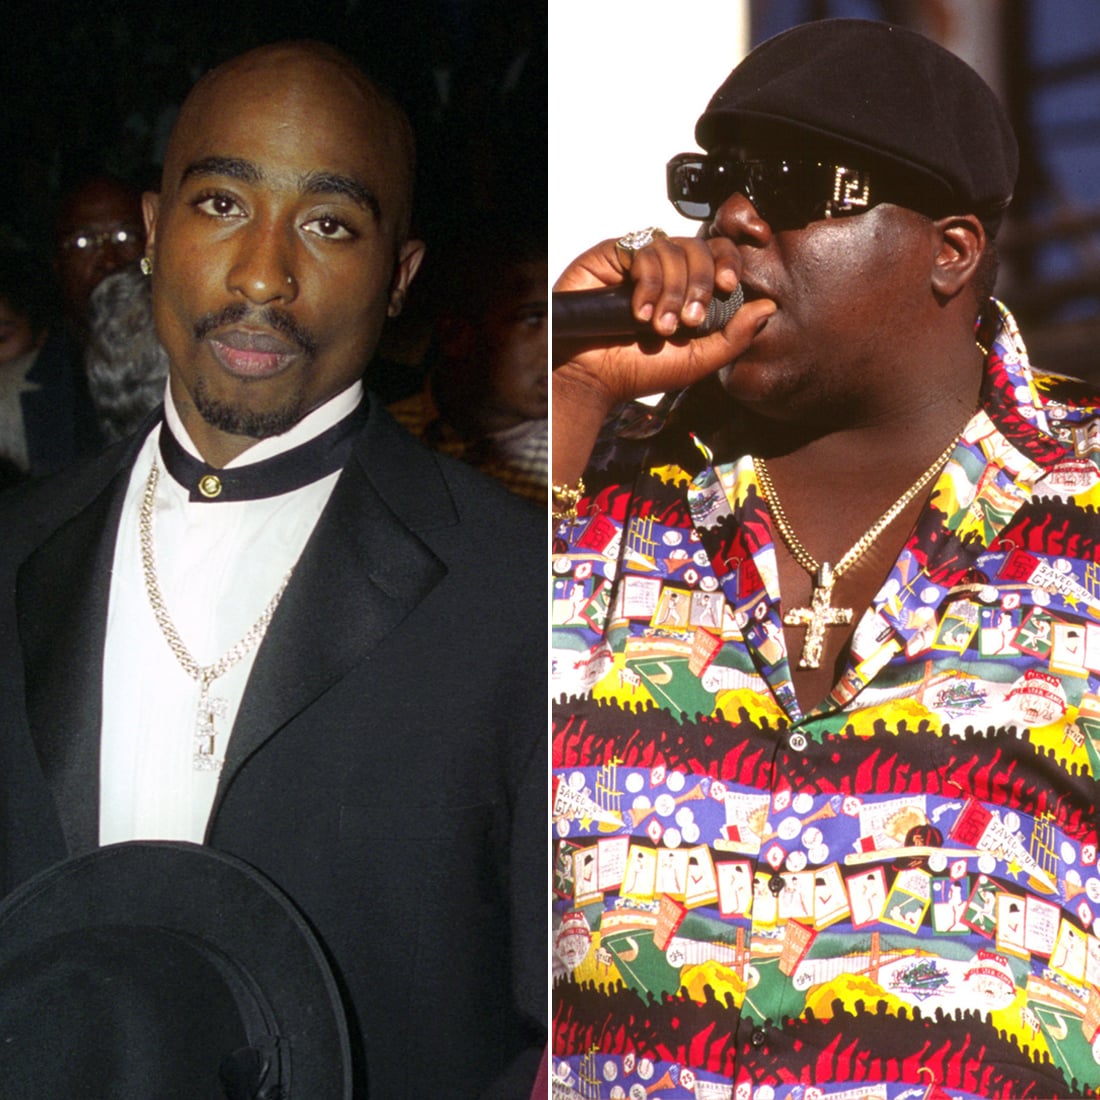 How Old Would Tupac Shakur and Biggie Smalls Be Today? POPSUGAR